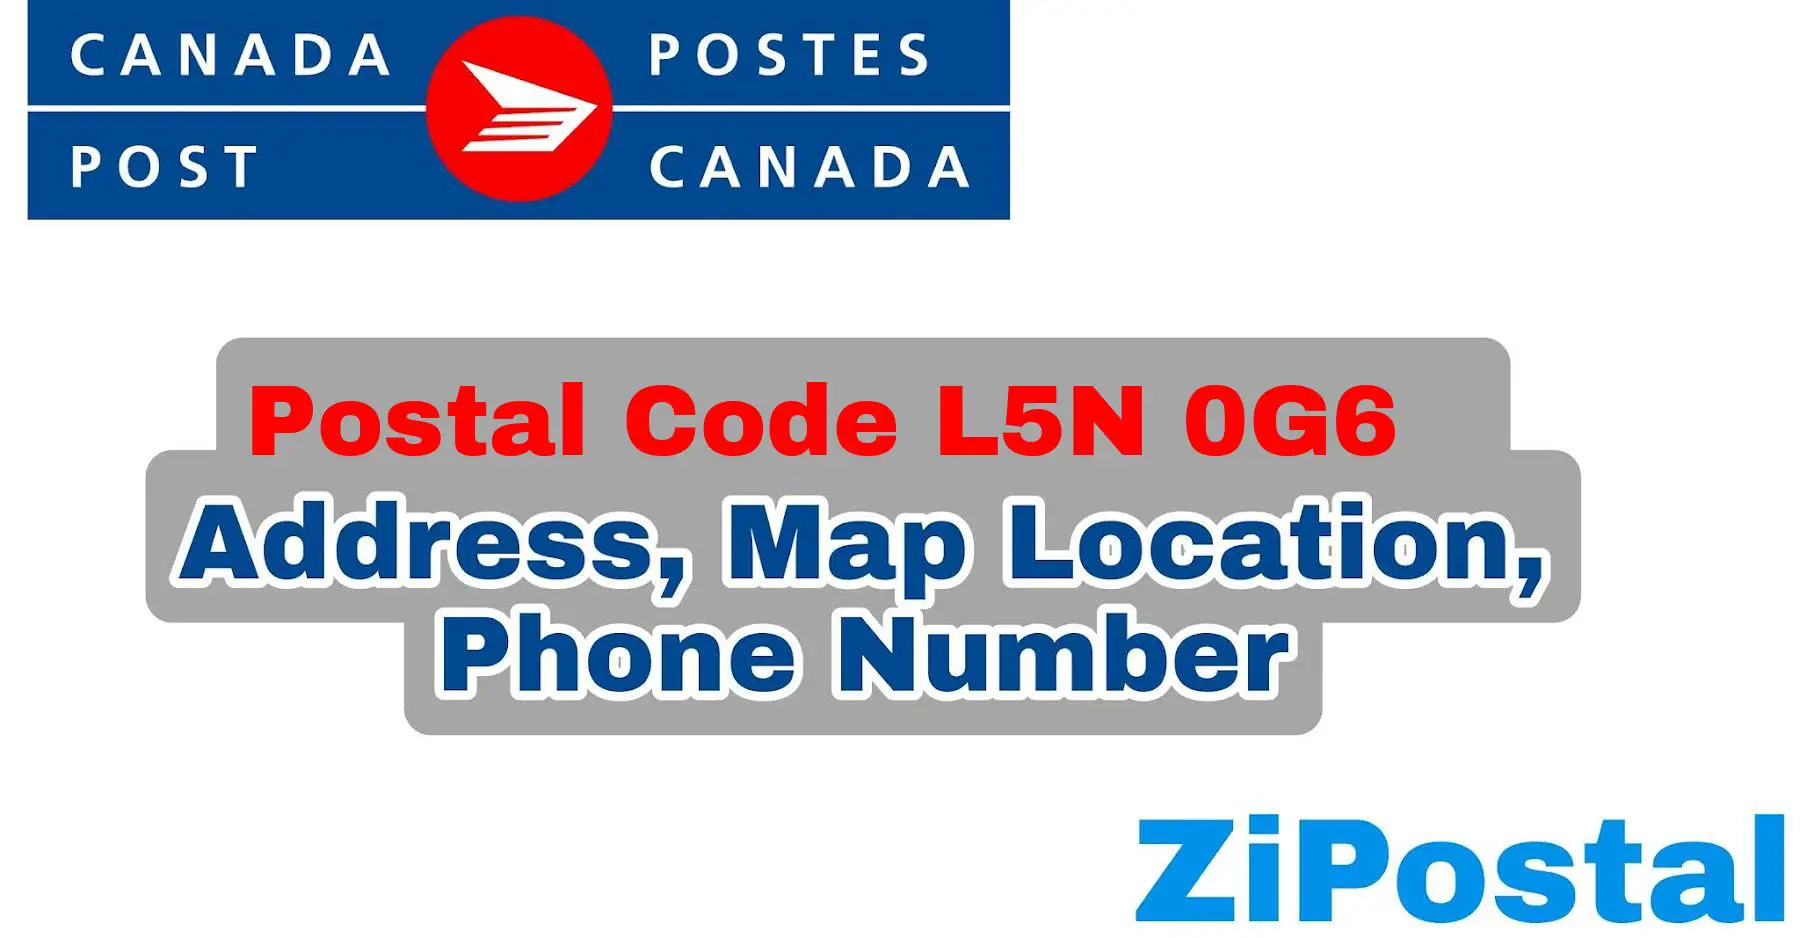 Postal Code L5N 0G6 Address Map Location and Phone Number